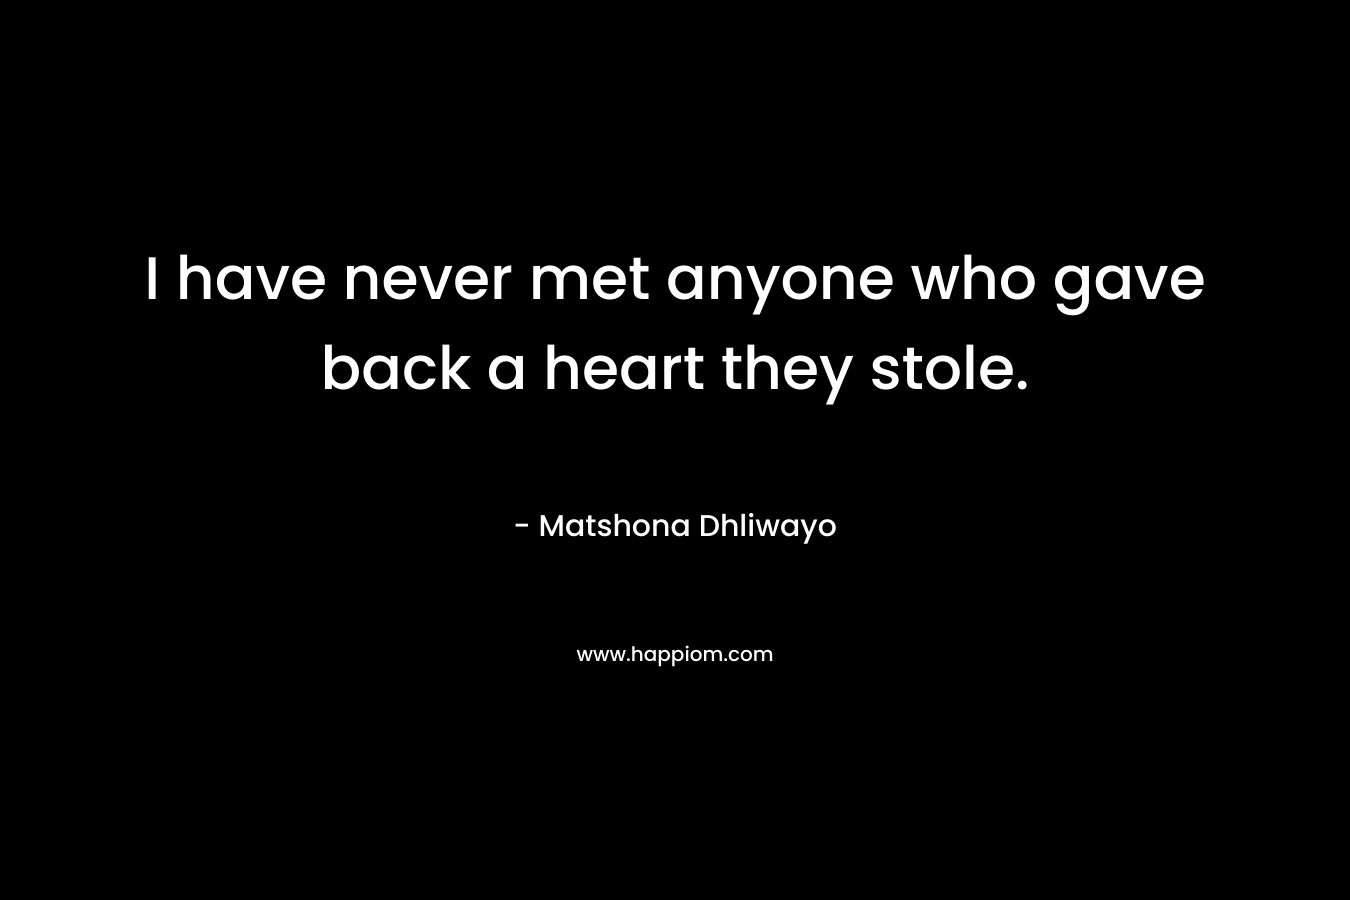 I have never met anyone who gave back a heart they stole. – Matshona Dhliwayo